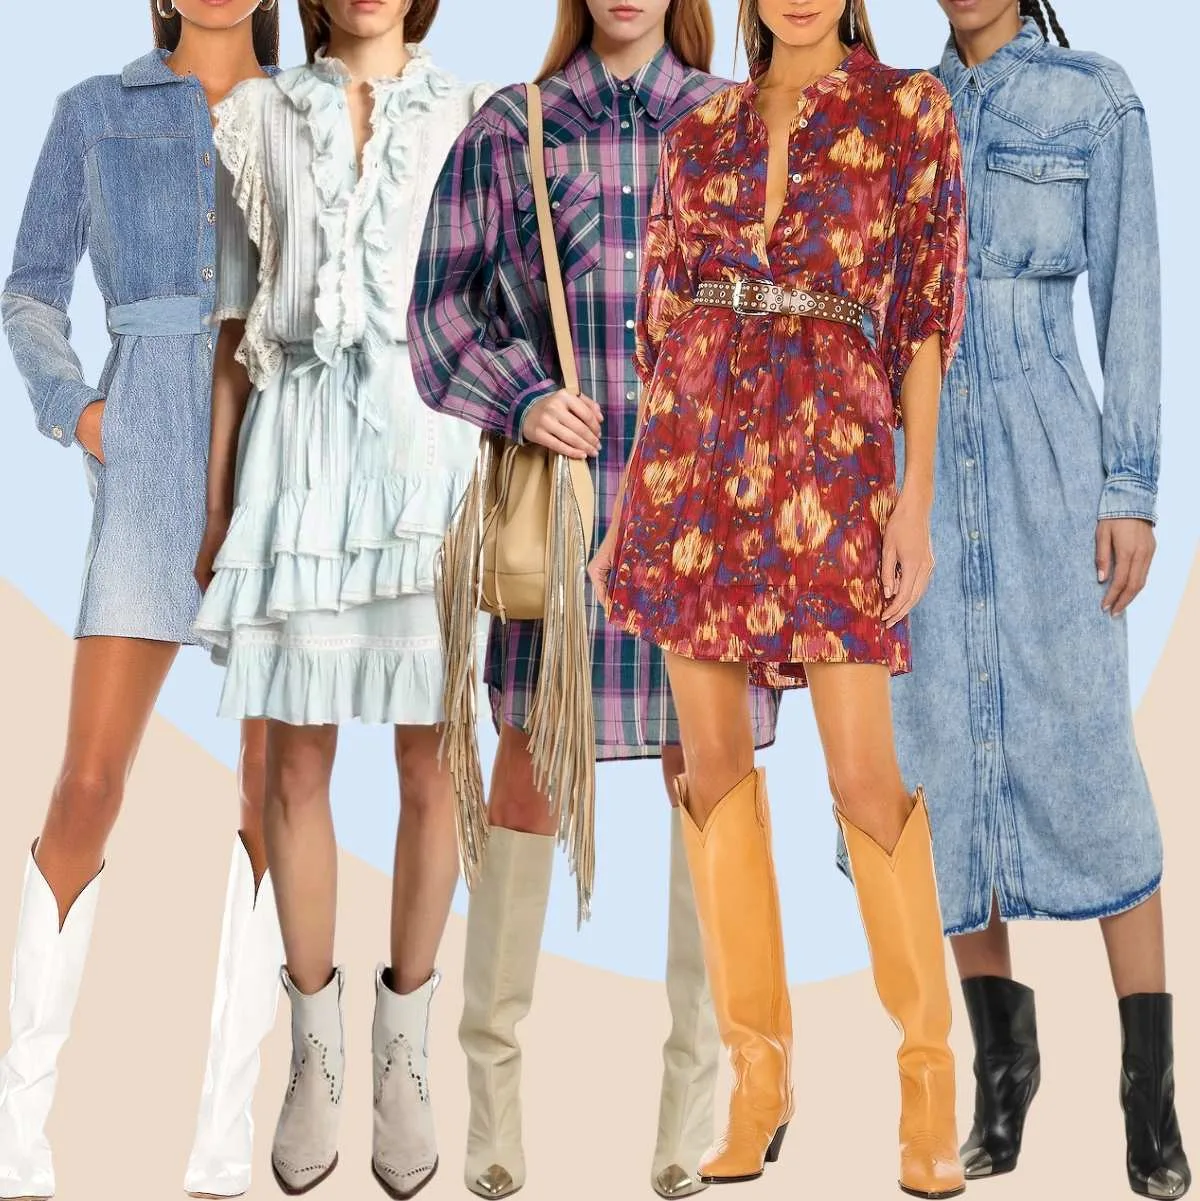 Collage of 5 women wearing different cowboy boots with a shirt dress.